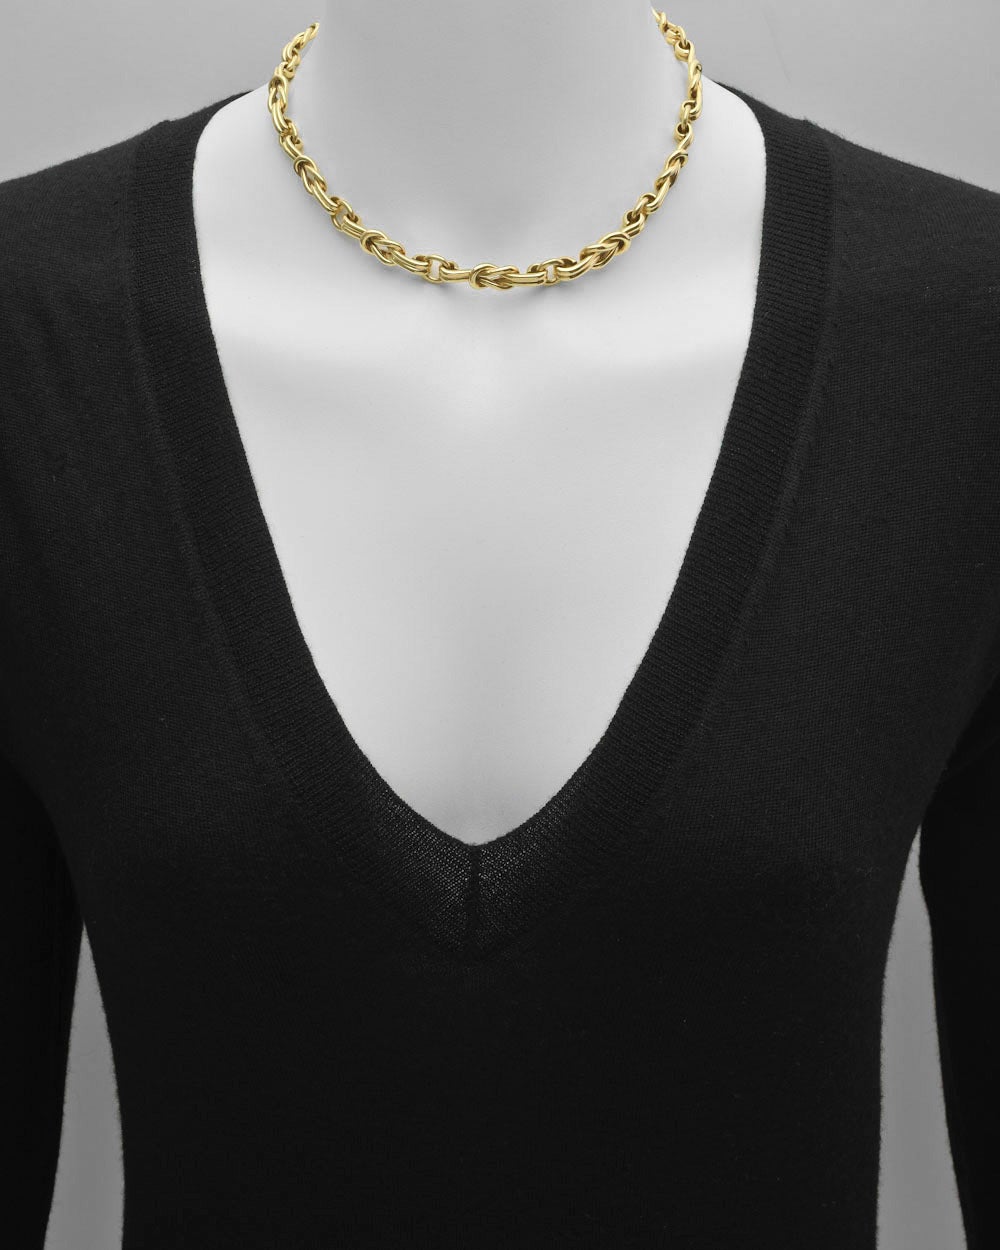 Stylized knot link collar necklace, in polished 18k yellow gold, signed Gucci. 15.75